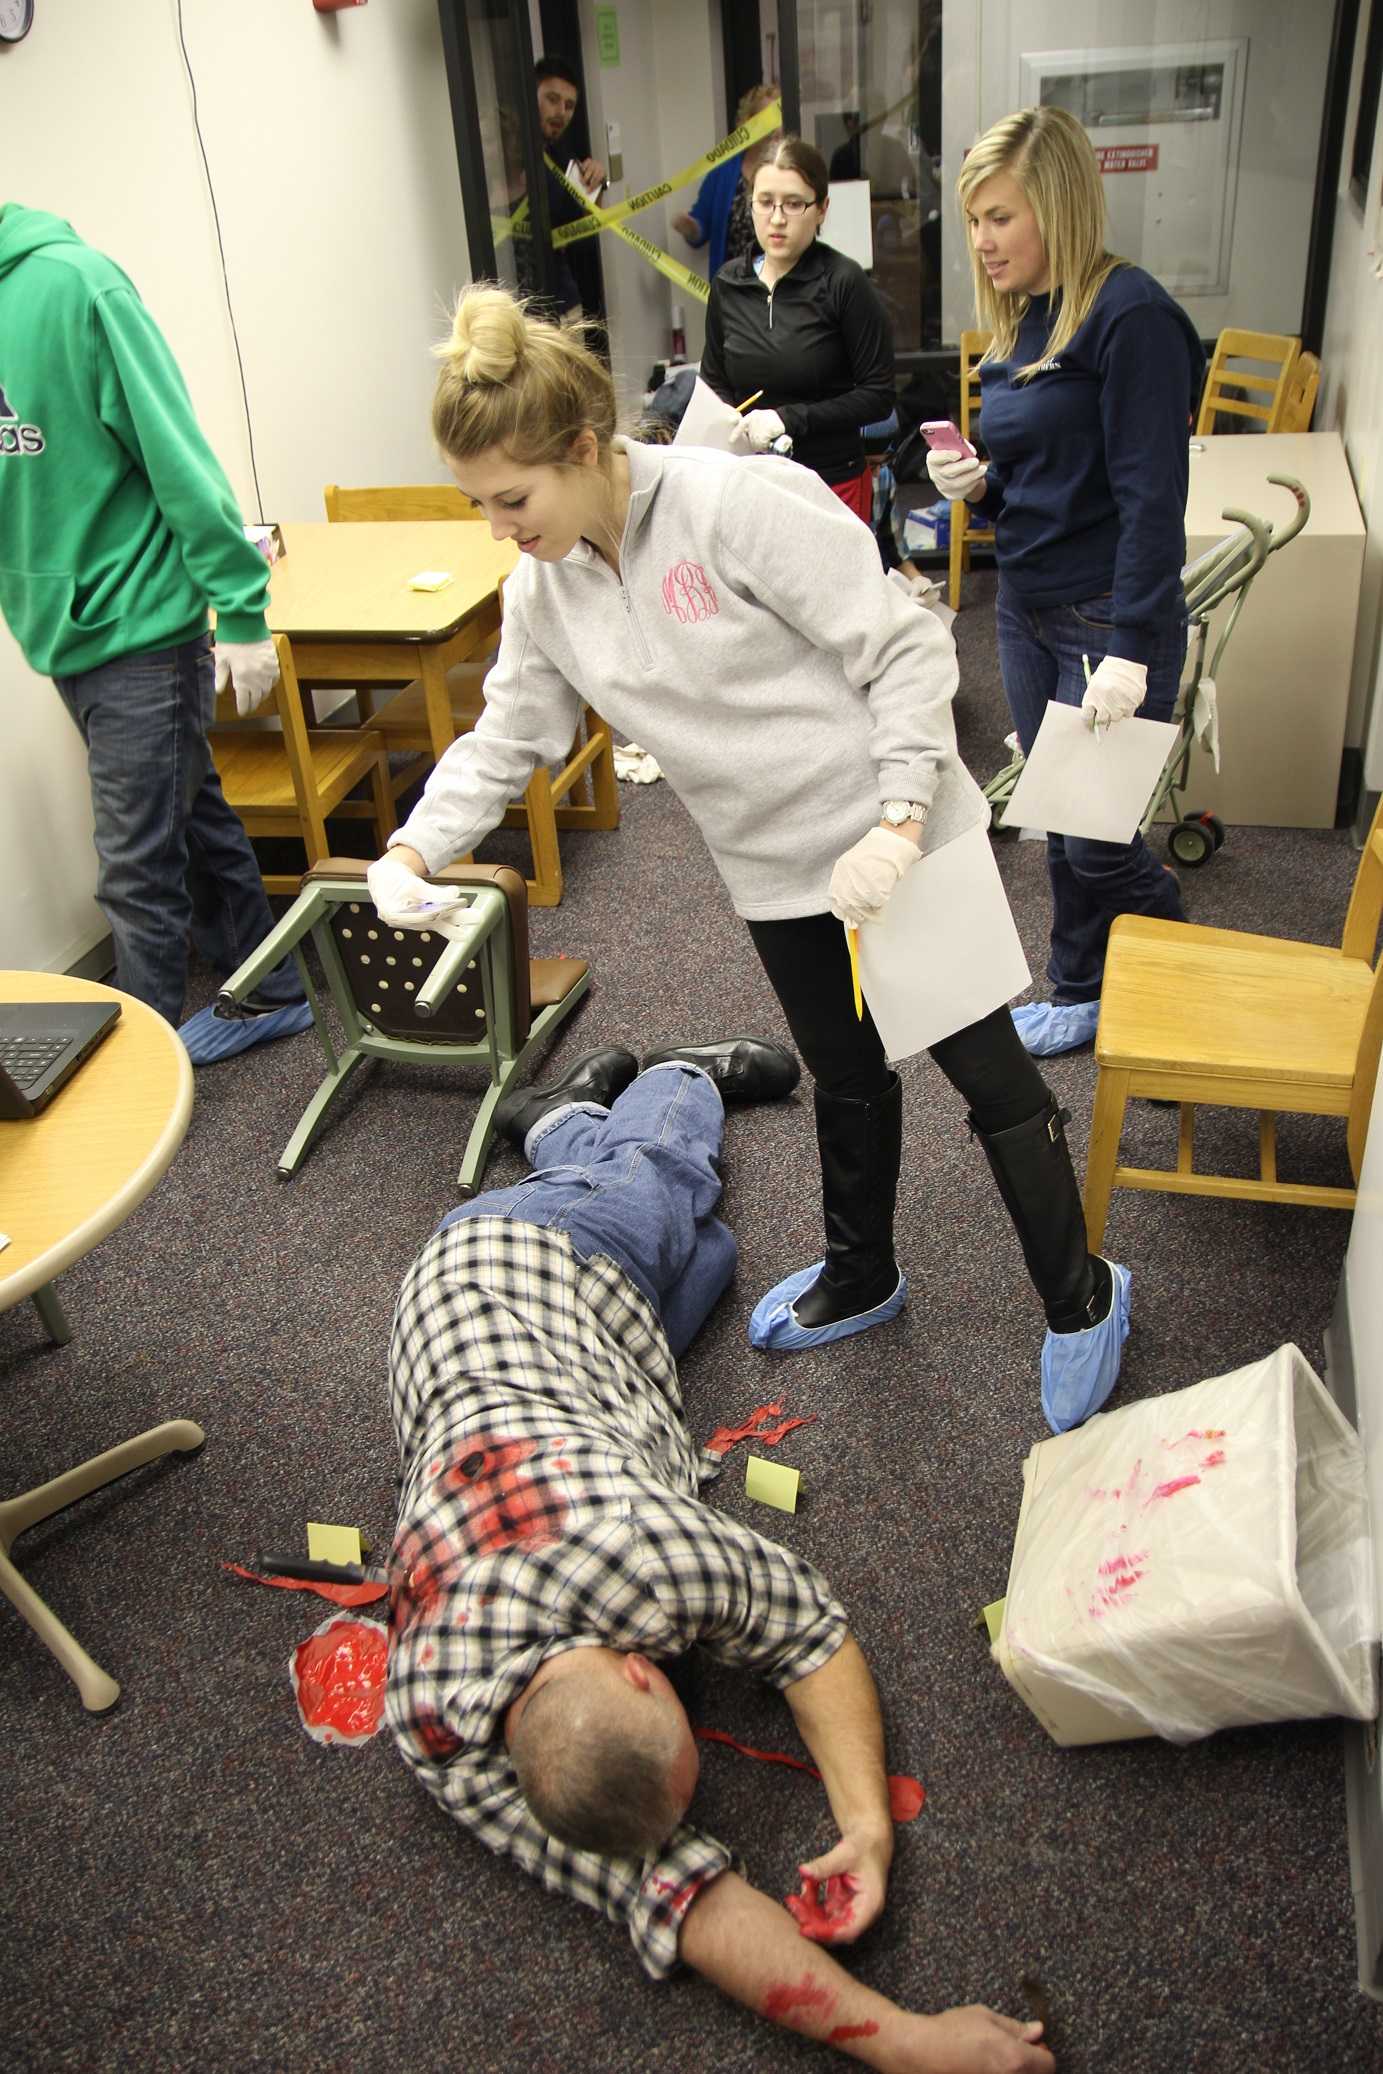 Students+learn+from+mock+crime+scene+in+Crestview+Hall